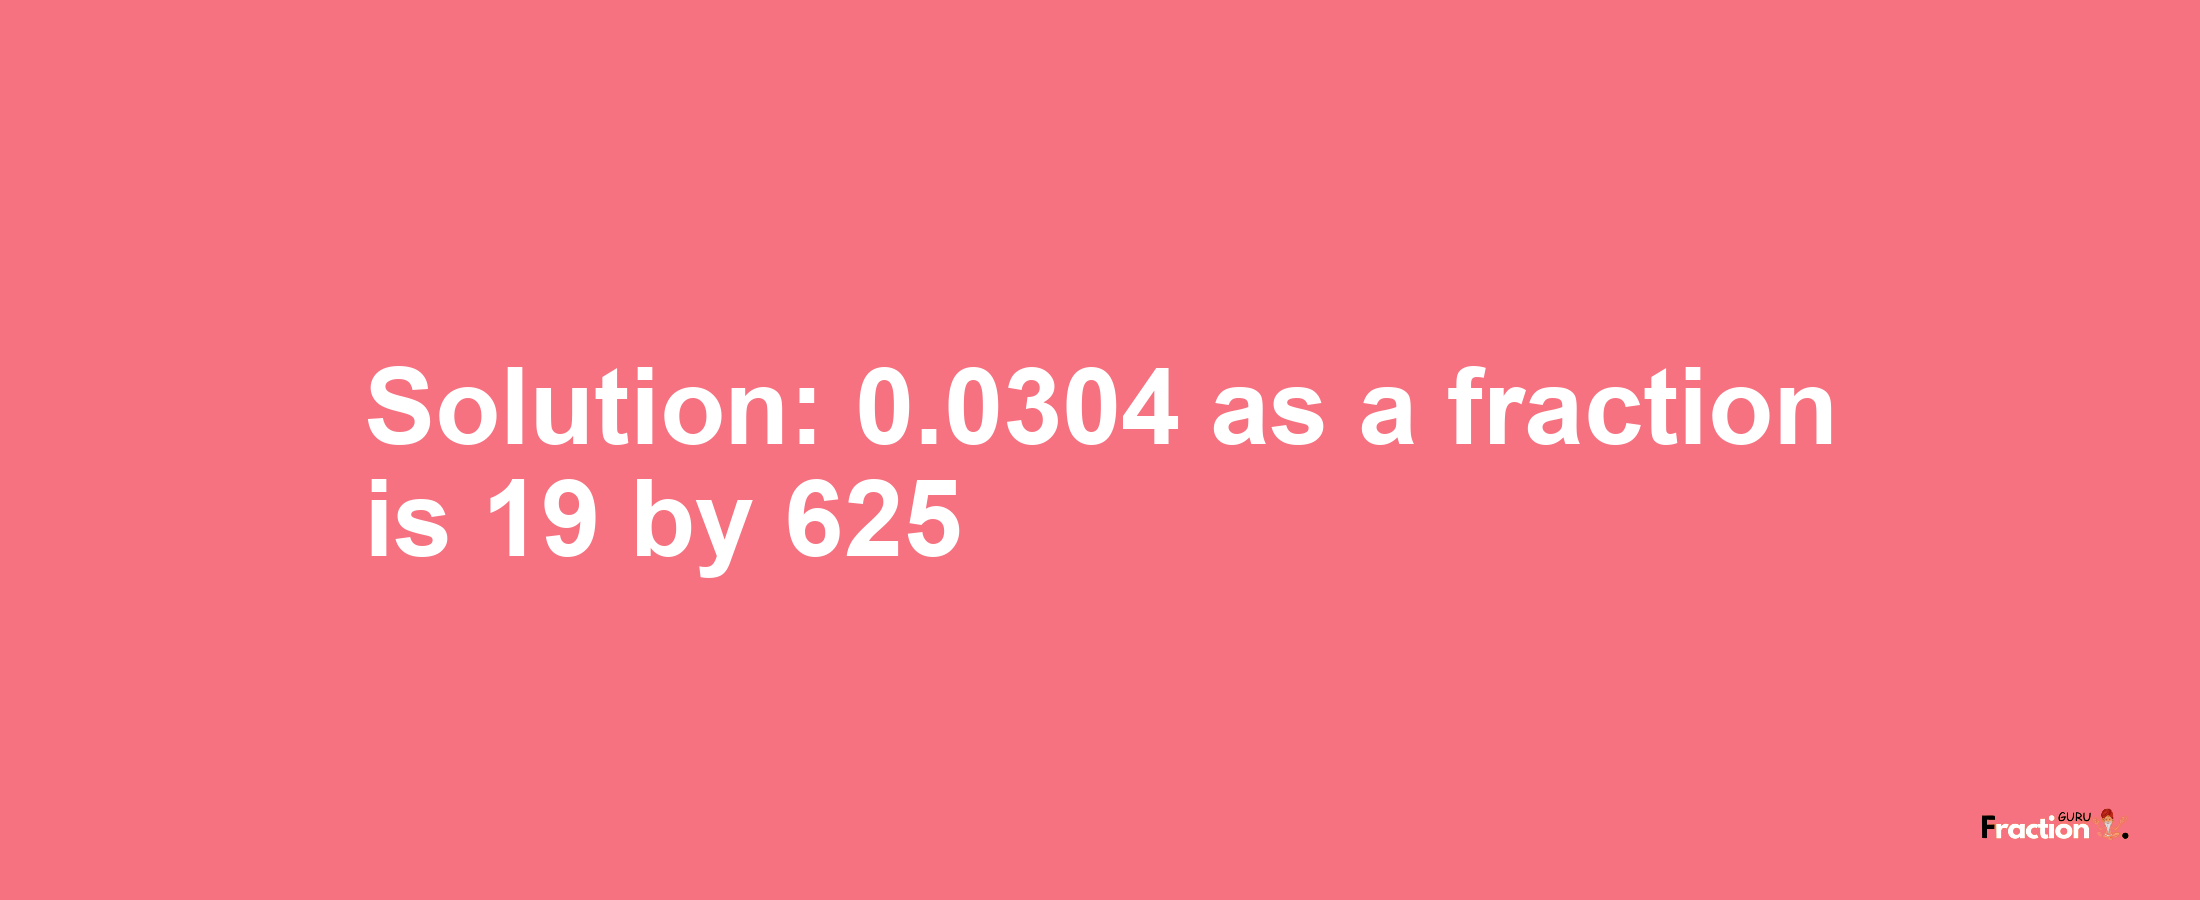 Solution:0.0304 as a fraction is 19/625